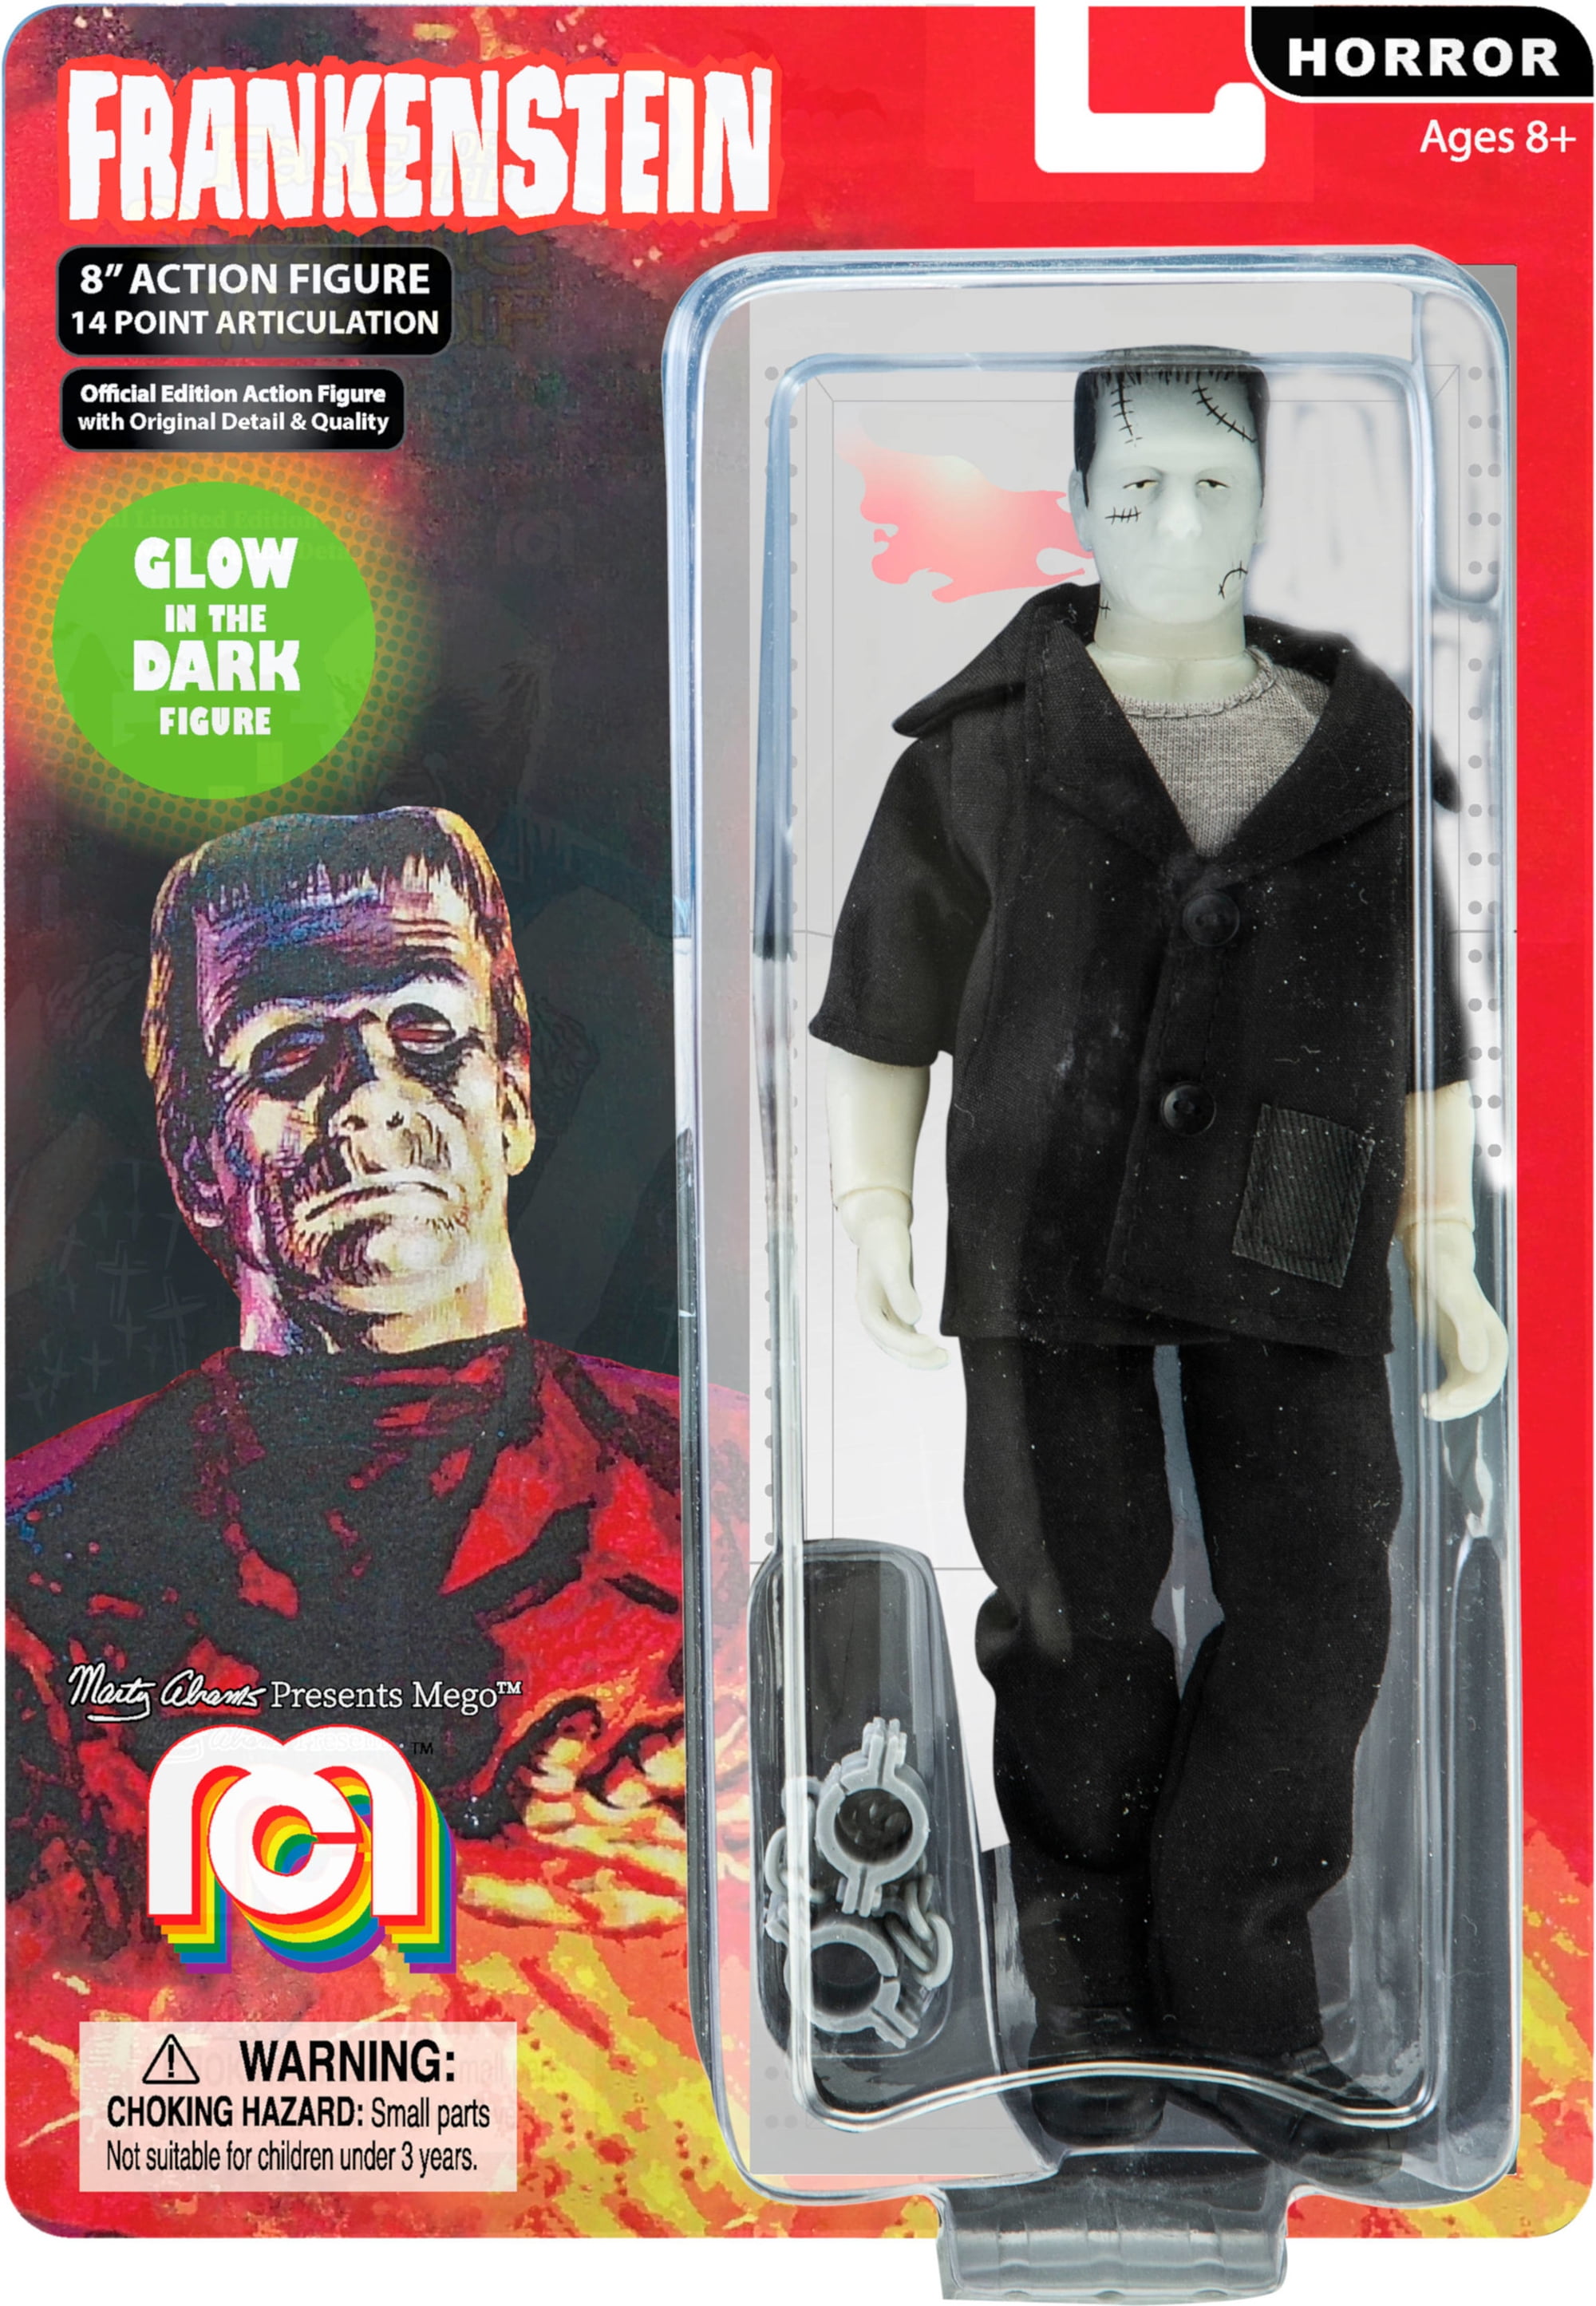 Mego Action Figures Limited Edition Collectors Item 8 Elvis Presley in Jailhouse Rock Black Denim outift with Black and White Striped Shirt 